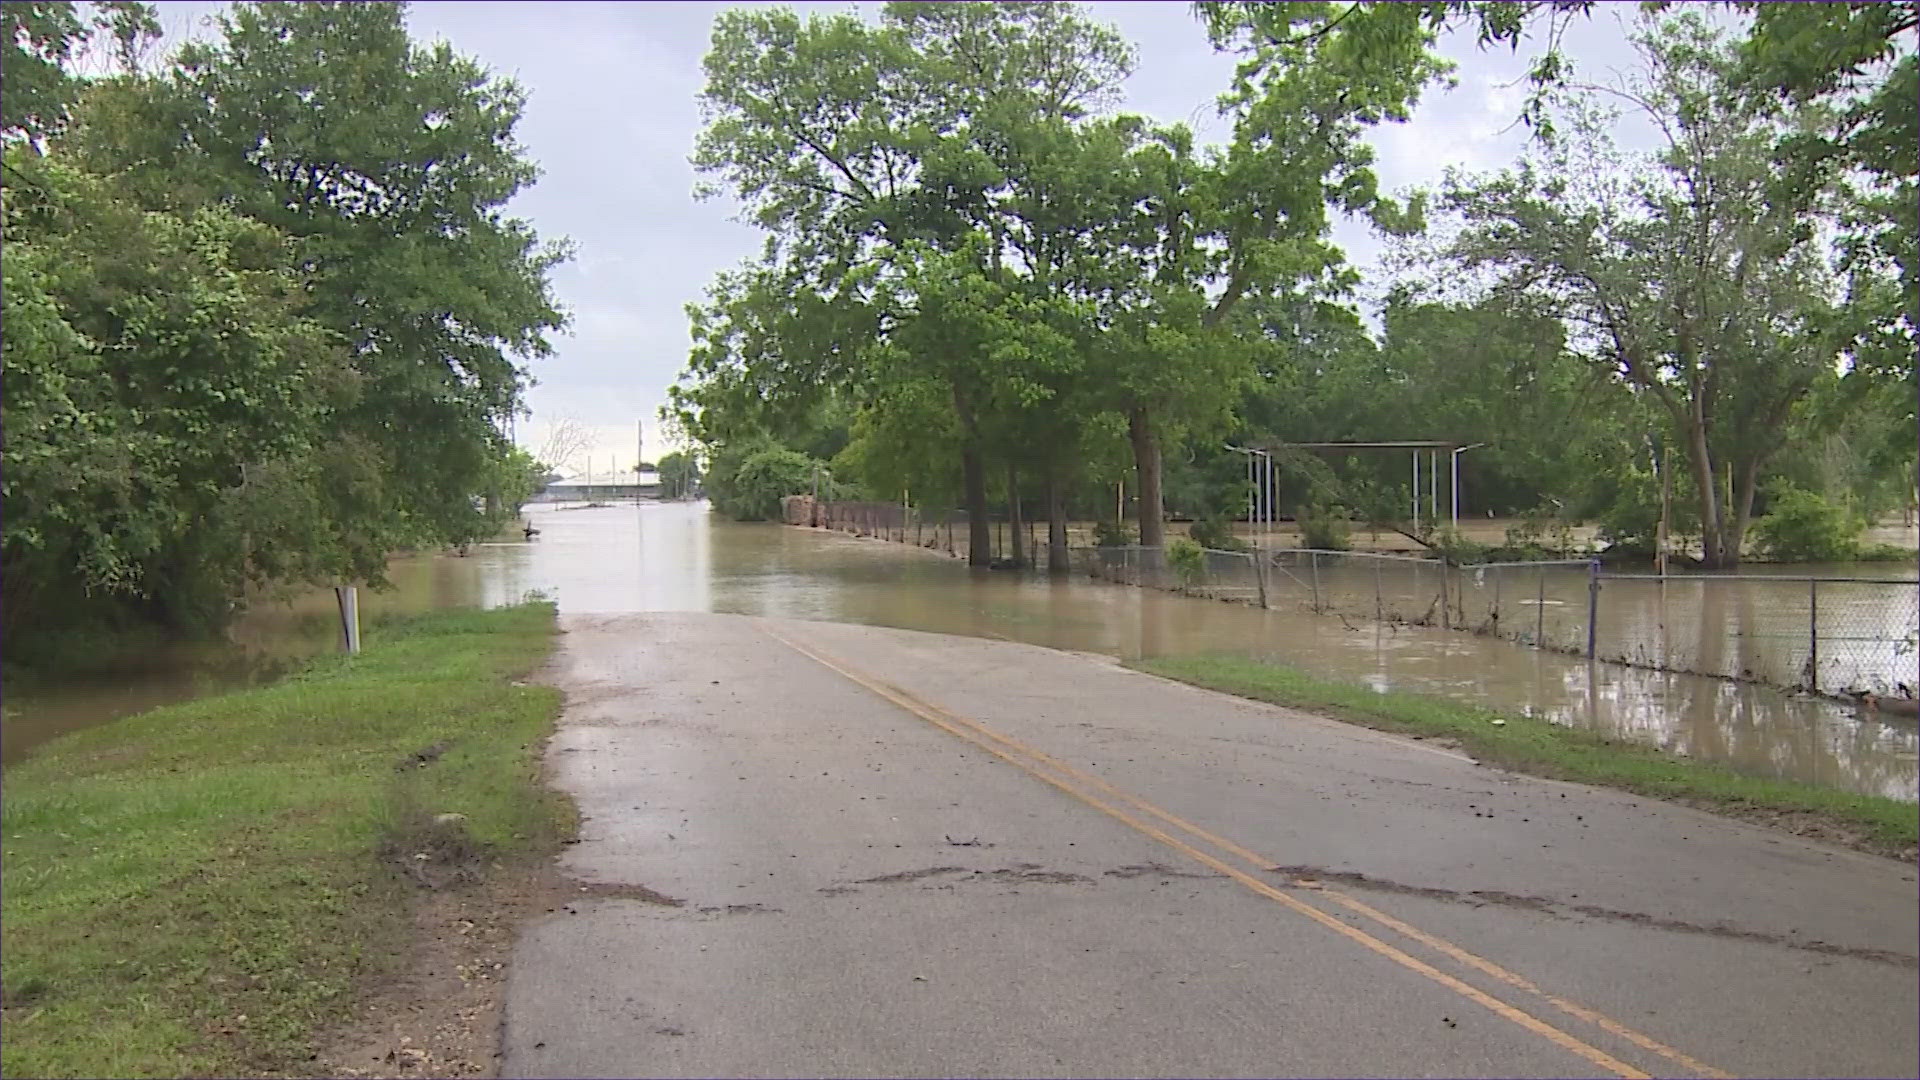 Crews spent the weekend conducting emergency rescues after heavy rains led to more flooding in east Harris County.